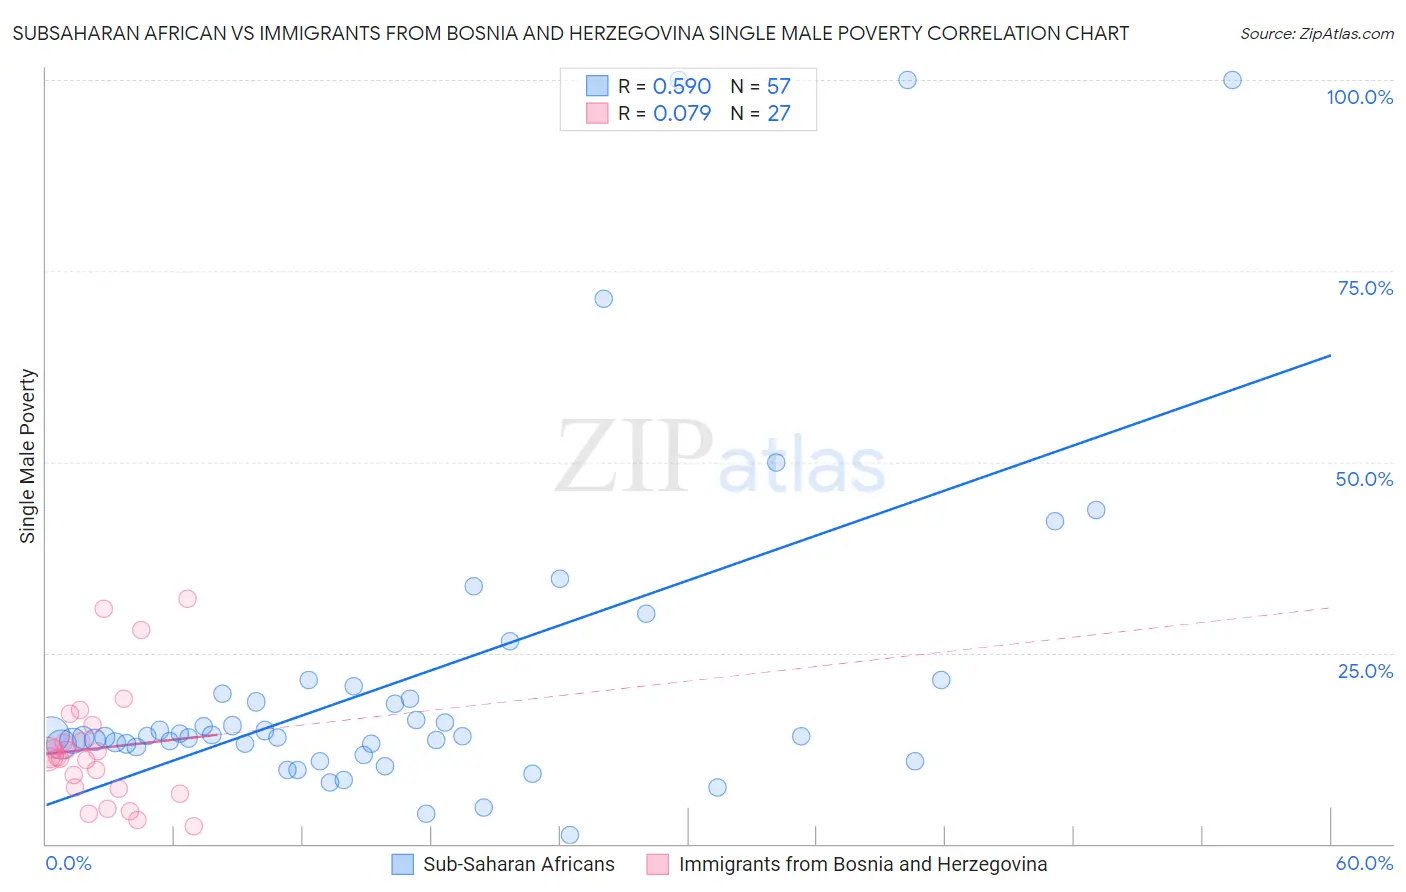 Subsaharan African vs Immigrants from Bosnia and Herzegovina Single Male Poverty